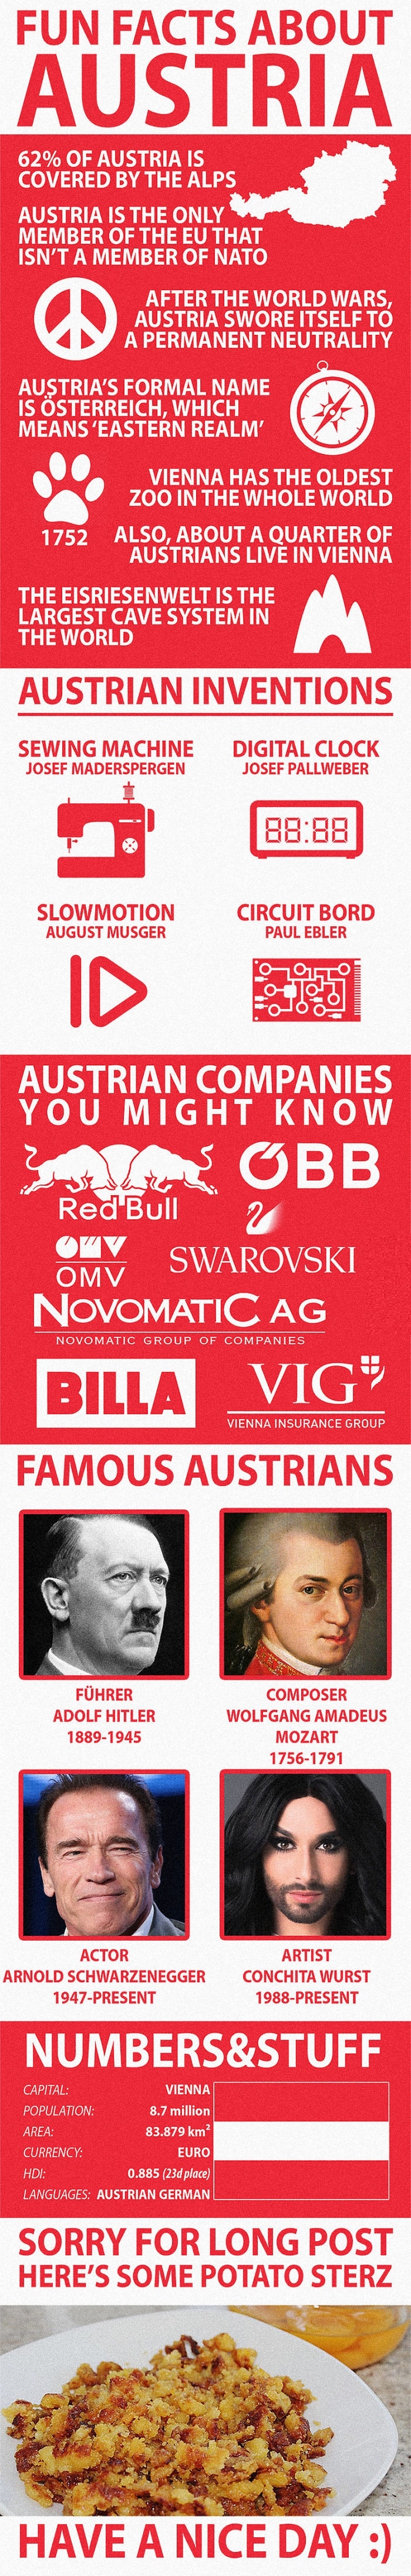 Fun facts about Austria